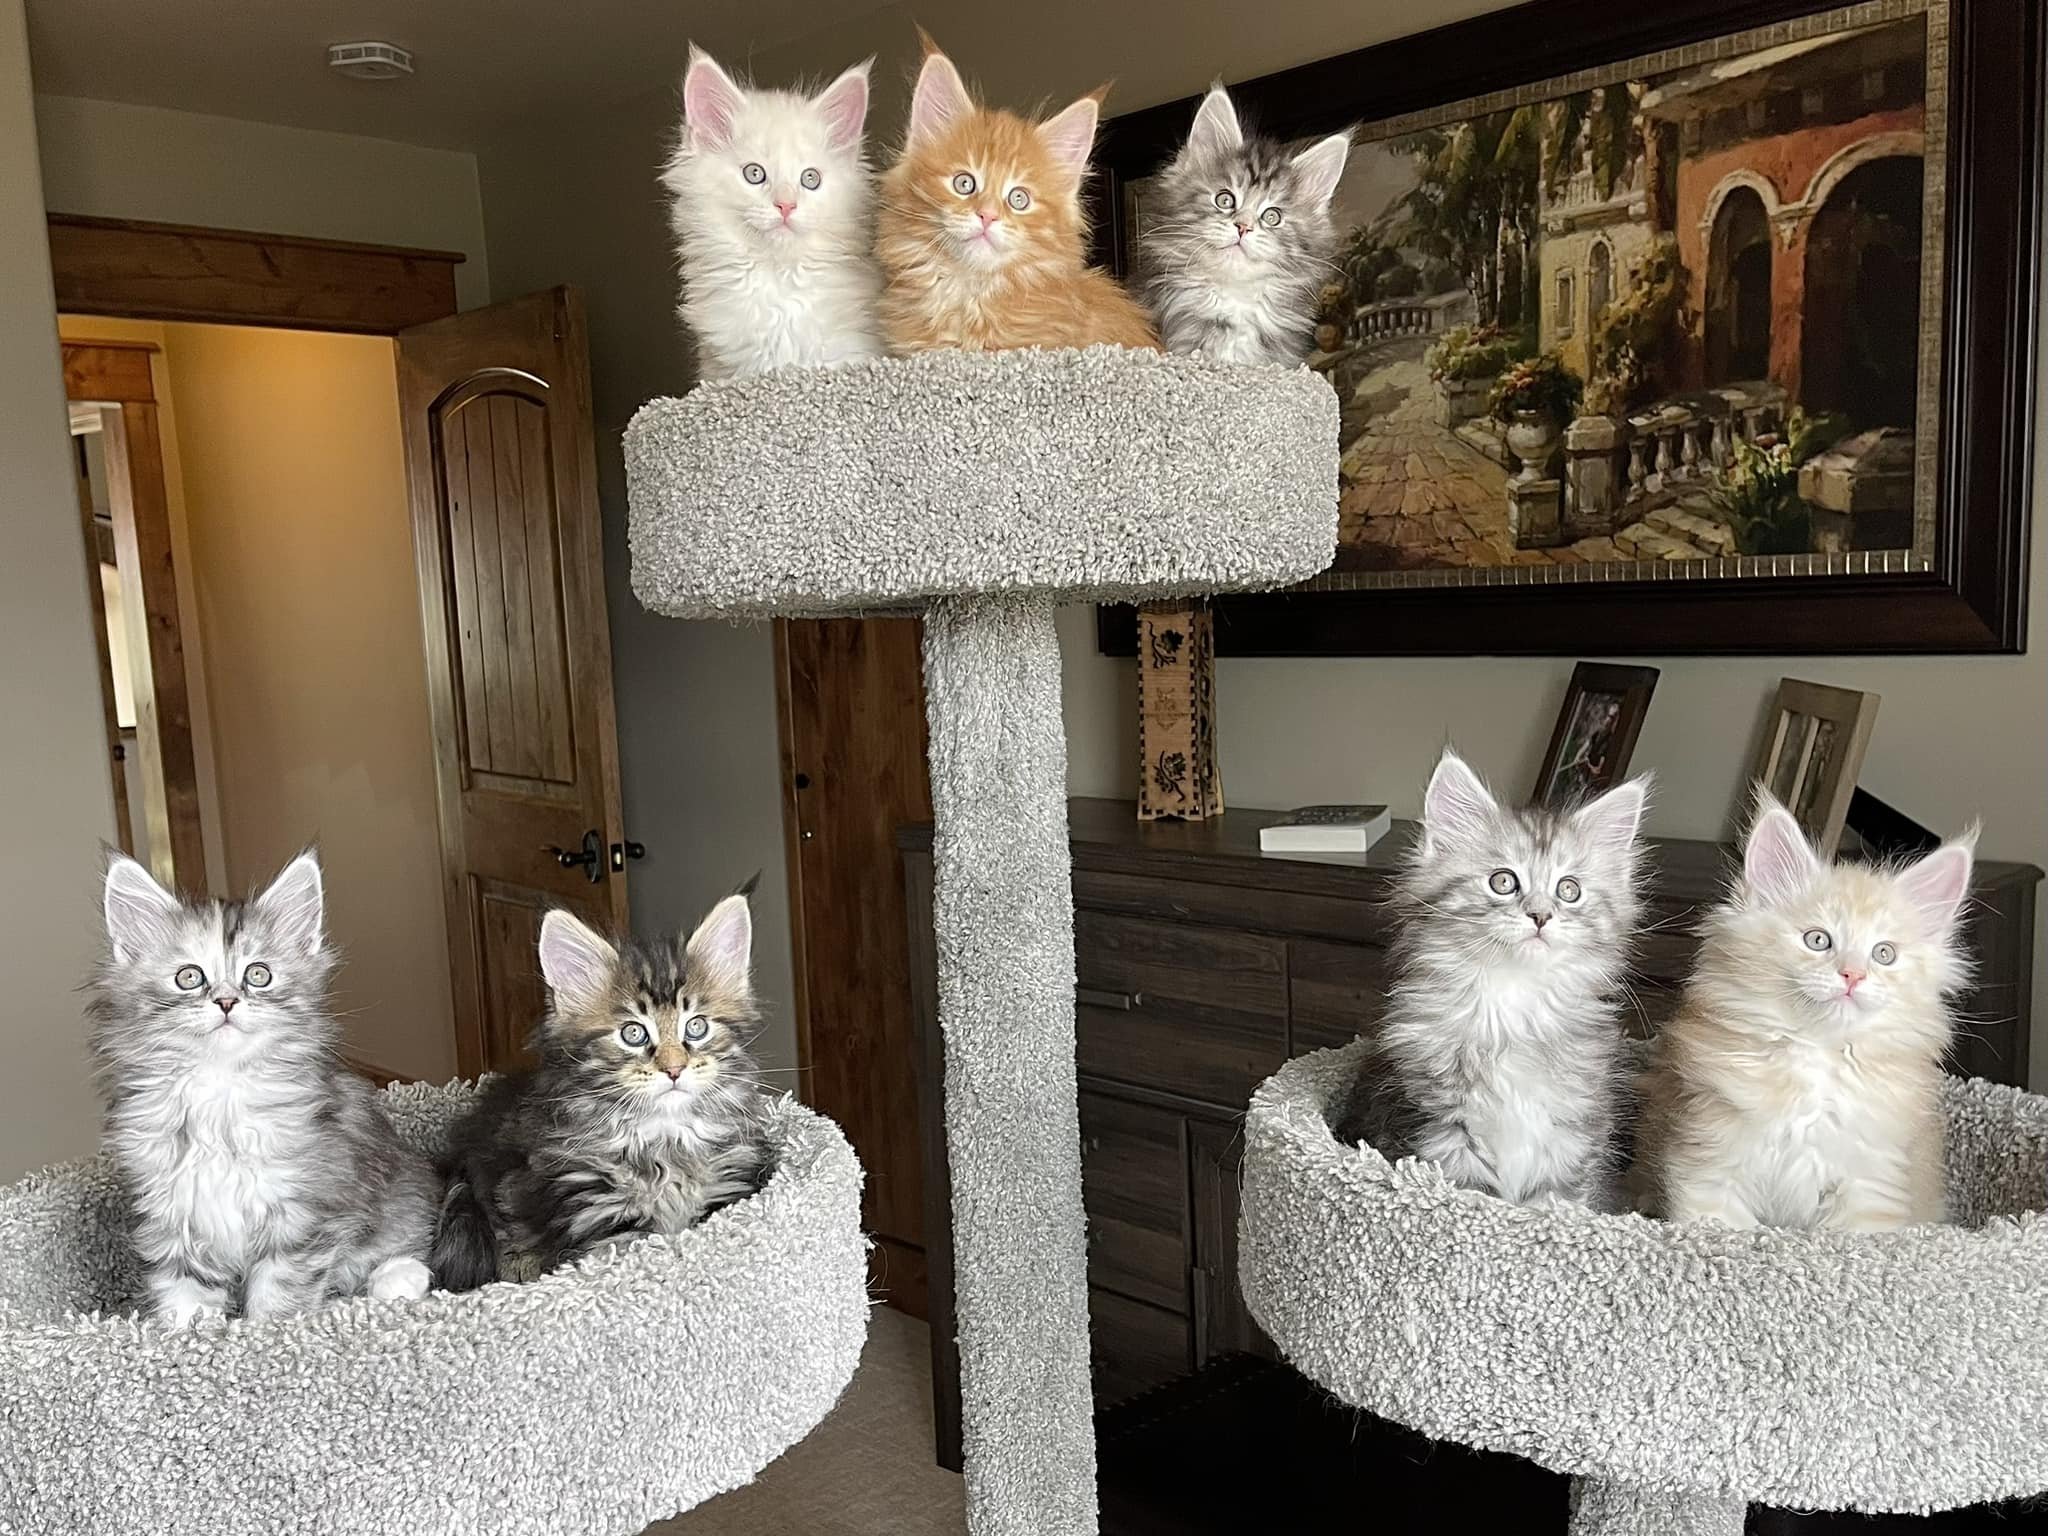 ❄️The Great Norsemen❄️
 Seven weeks old 🥰

(all kittens are reserved)

#kittens #mainecoon #mainecoonkittens #cutenessoverload